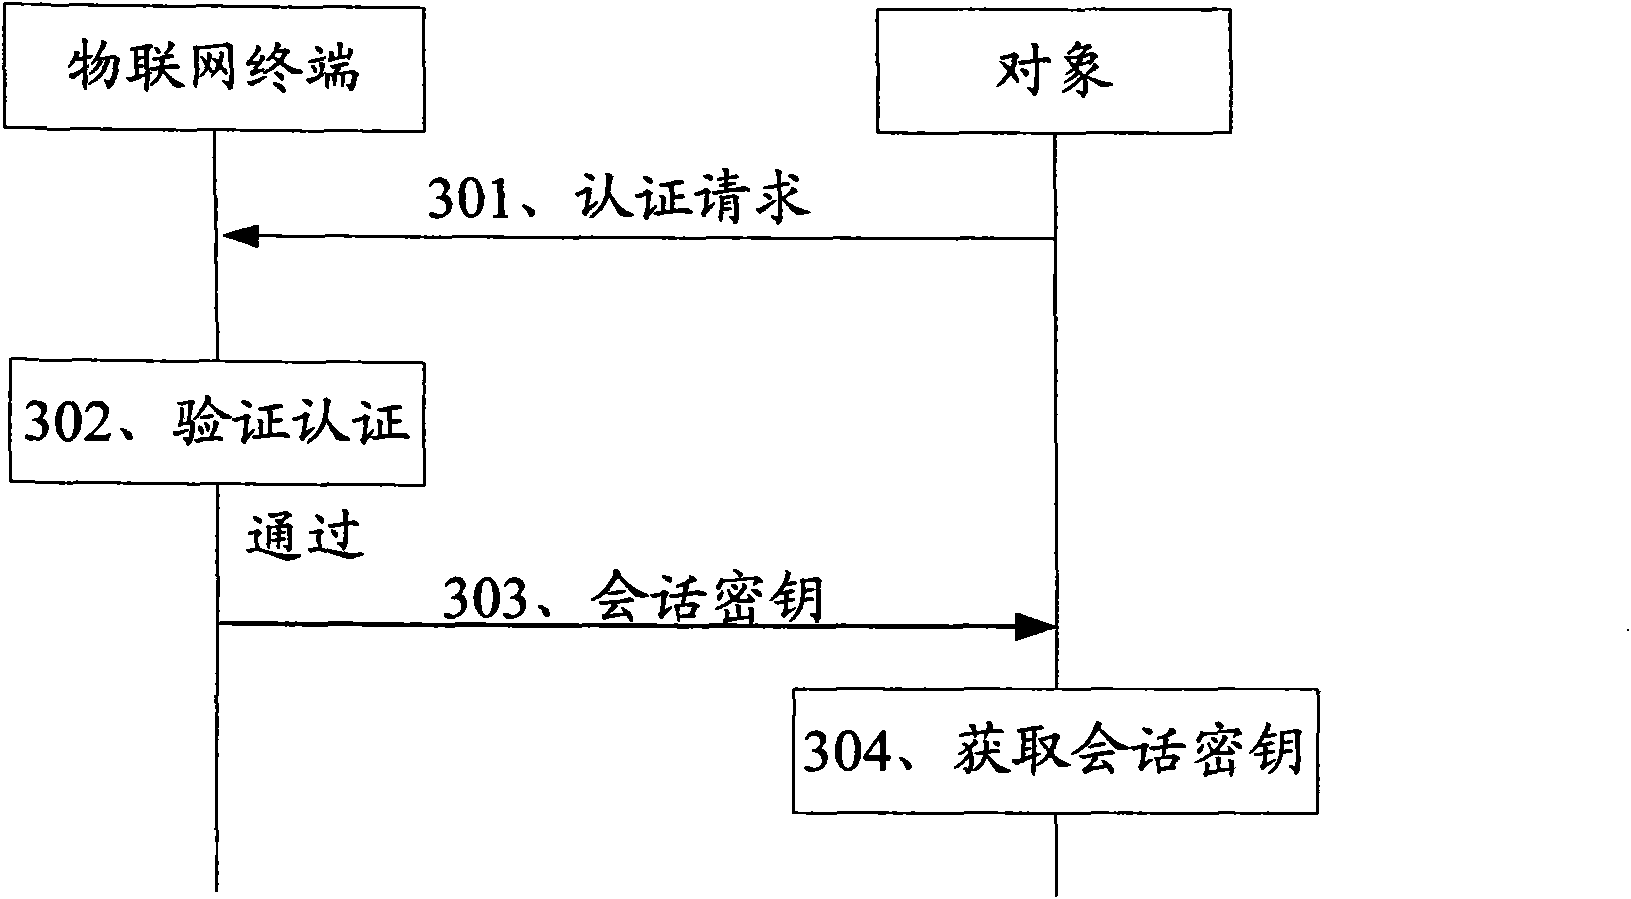 Method and system for authorizing management of terminals of internet of things